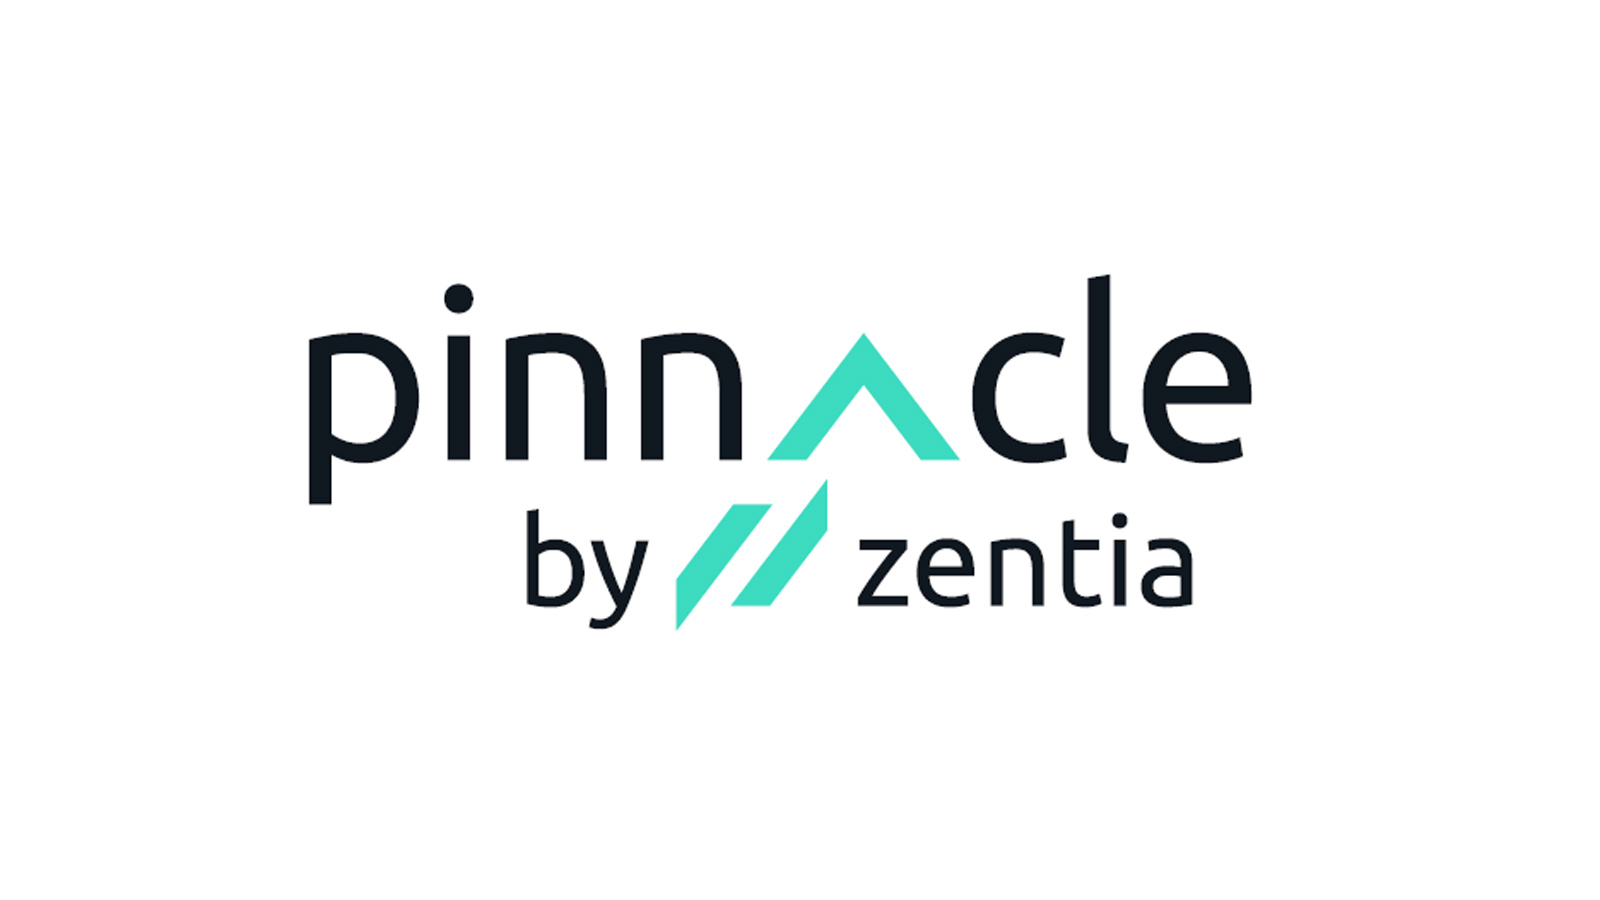 Zentia Pinnacle Approved Partners